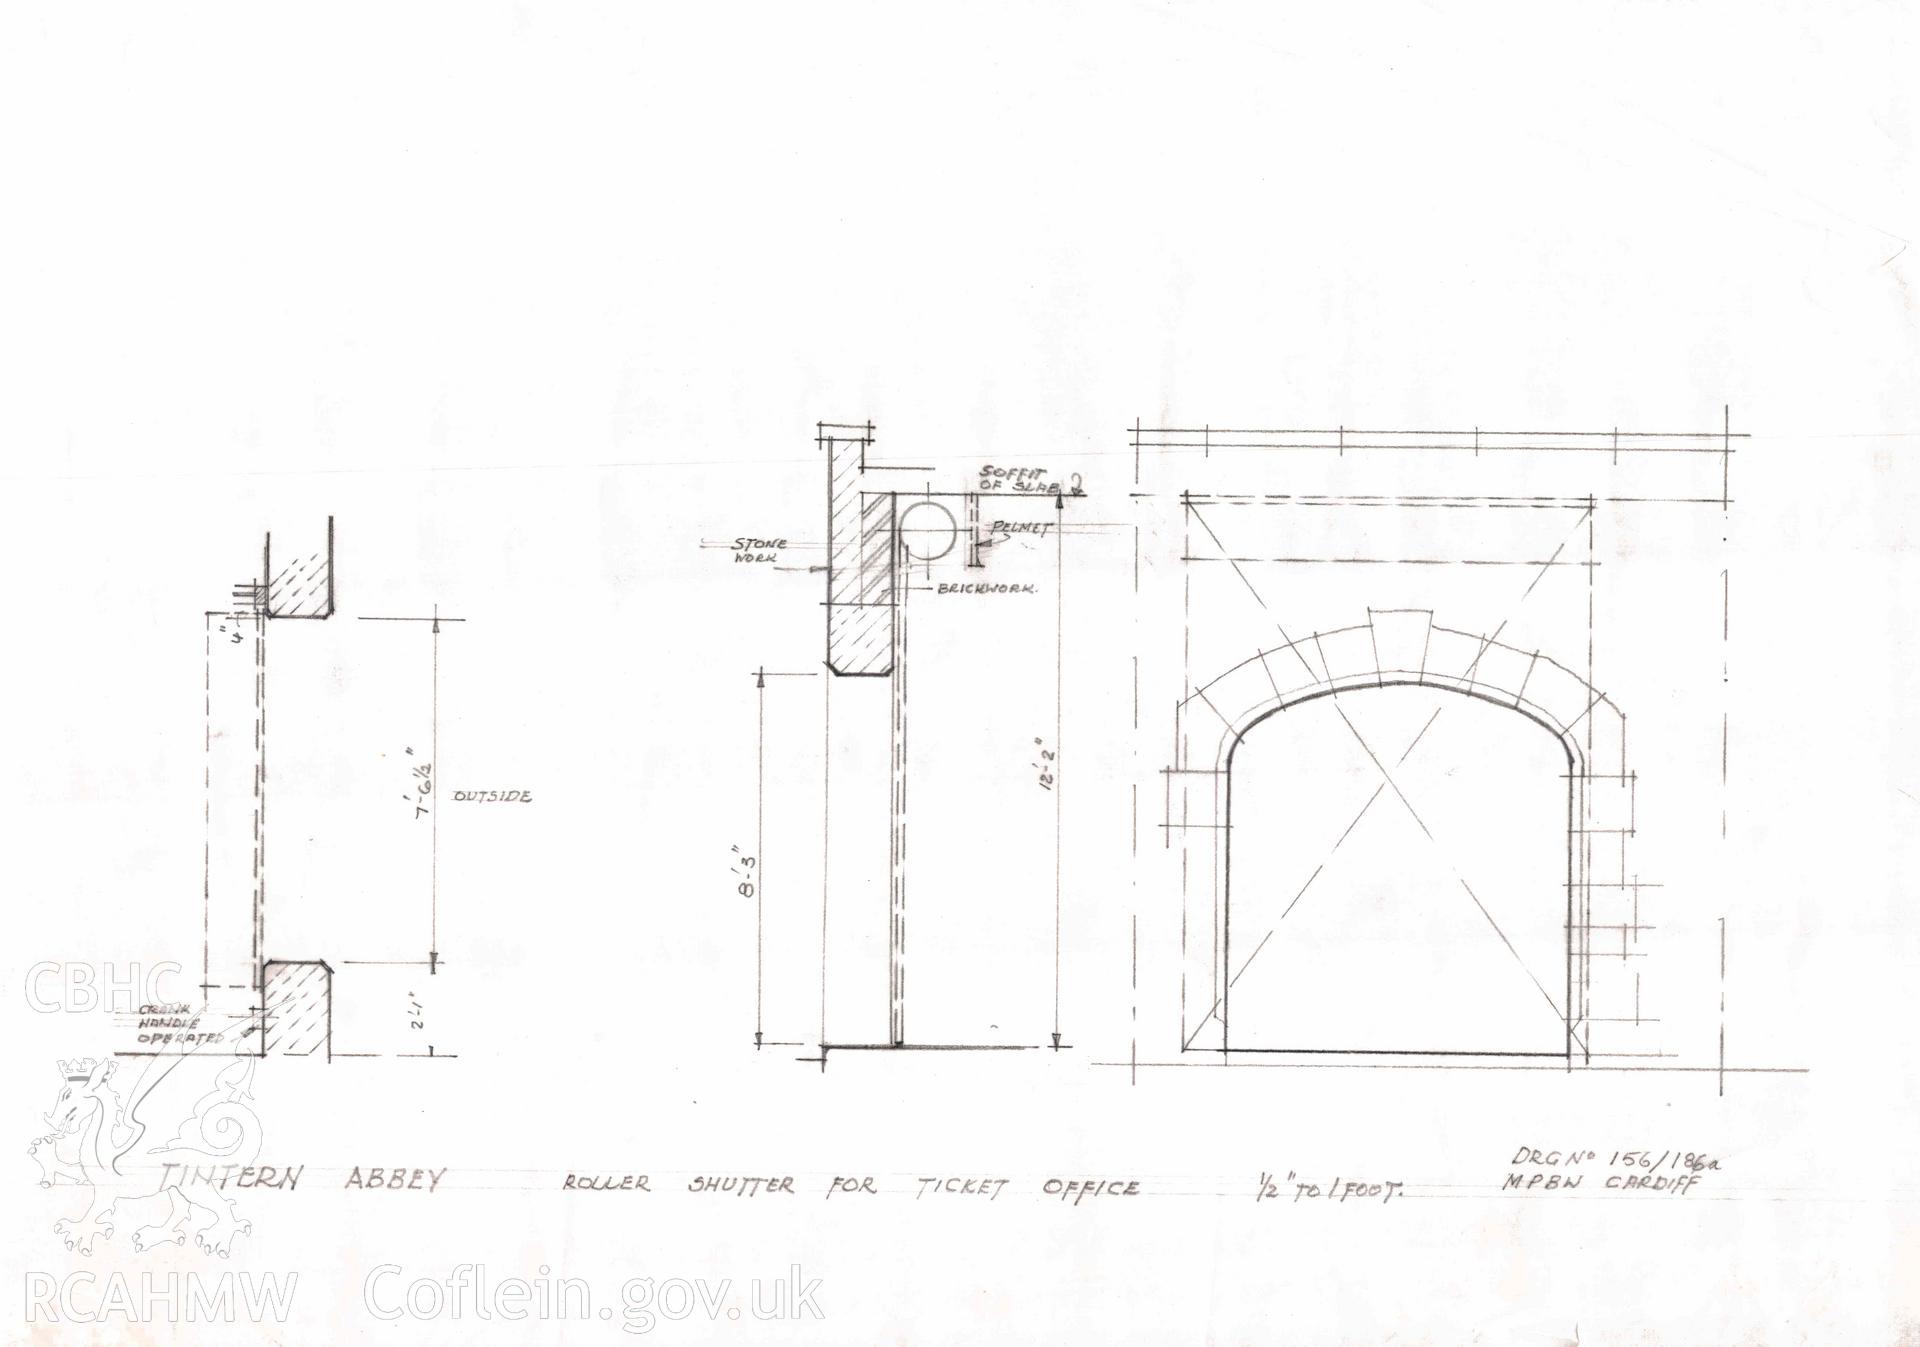 Cadw guardianship monument drawing, details of roller shutter for ticket office , Tintern Abbey.